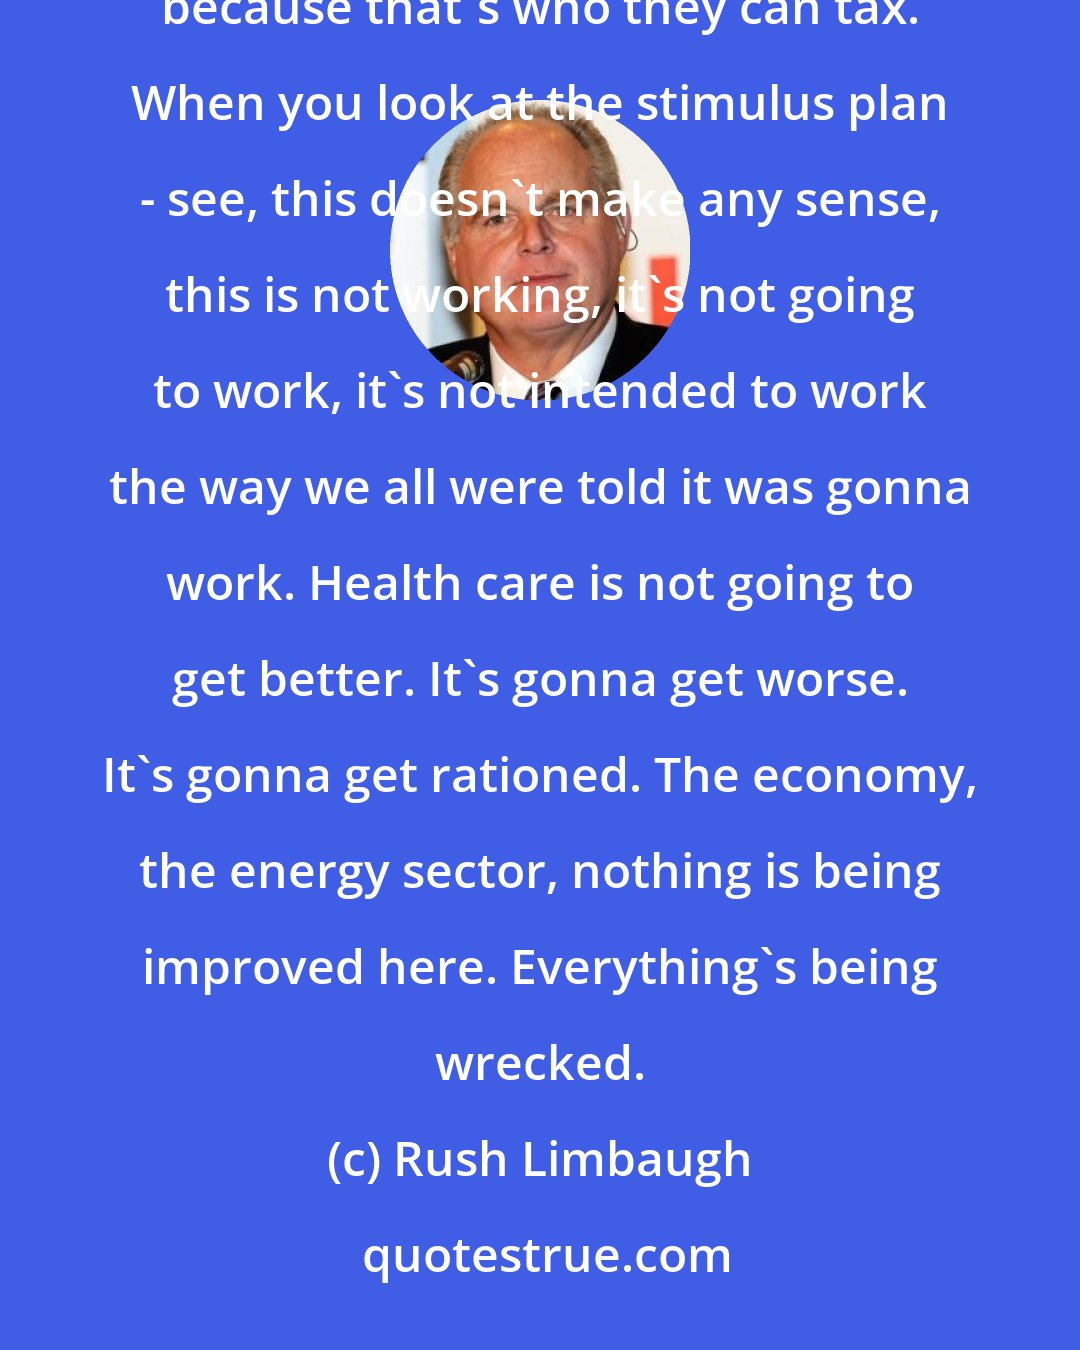 Rush Limbaugh: The Democrats are going to tax everybody through the roof. It is going to be focused on people that are wealthy because that's who they can tax. When you look at the stimulus plan - see, this doesn't make any sense, this is not working, it's not going to work, it's not intended to work the way we all were told it was gonna work. Health care is not going to get better. It's gonna get worse. It's gonna get rationed. The economy, the energy sector, nothing is being improved here. Everything's being wrecked.